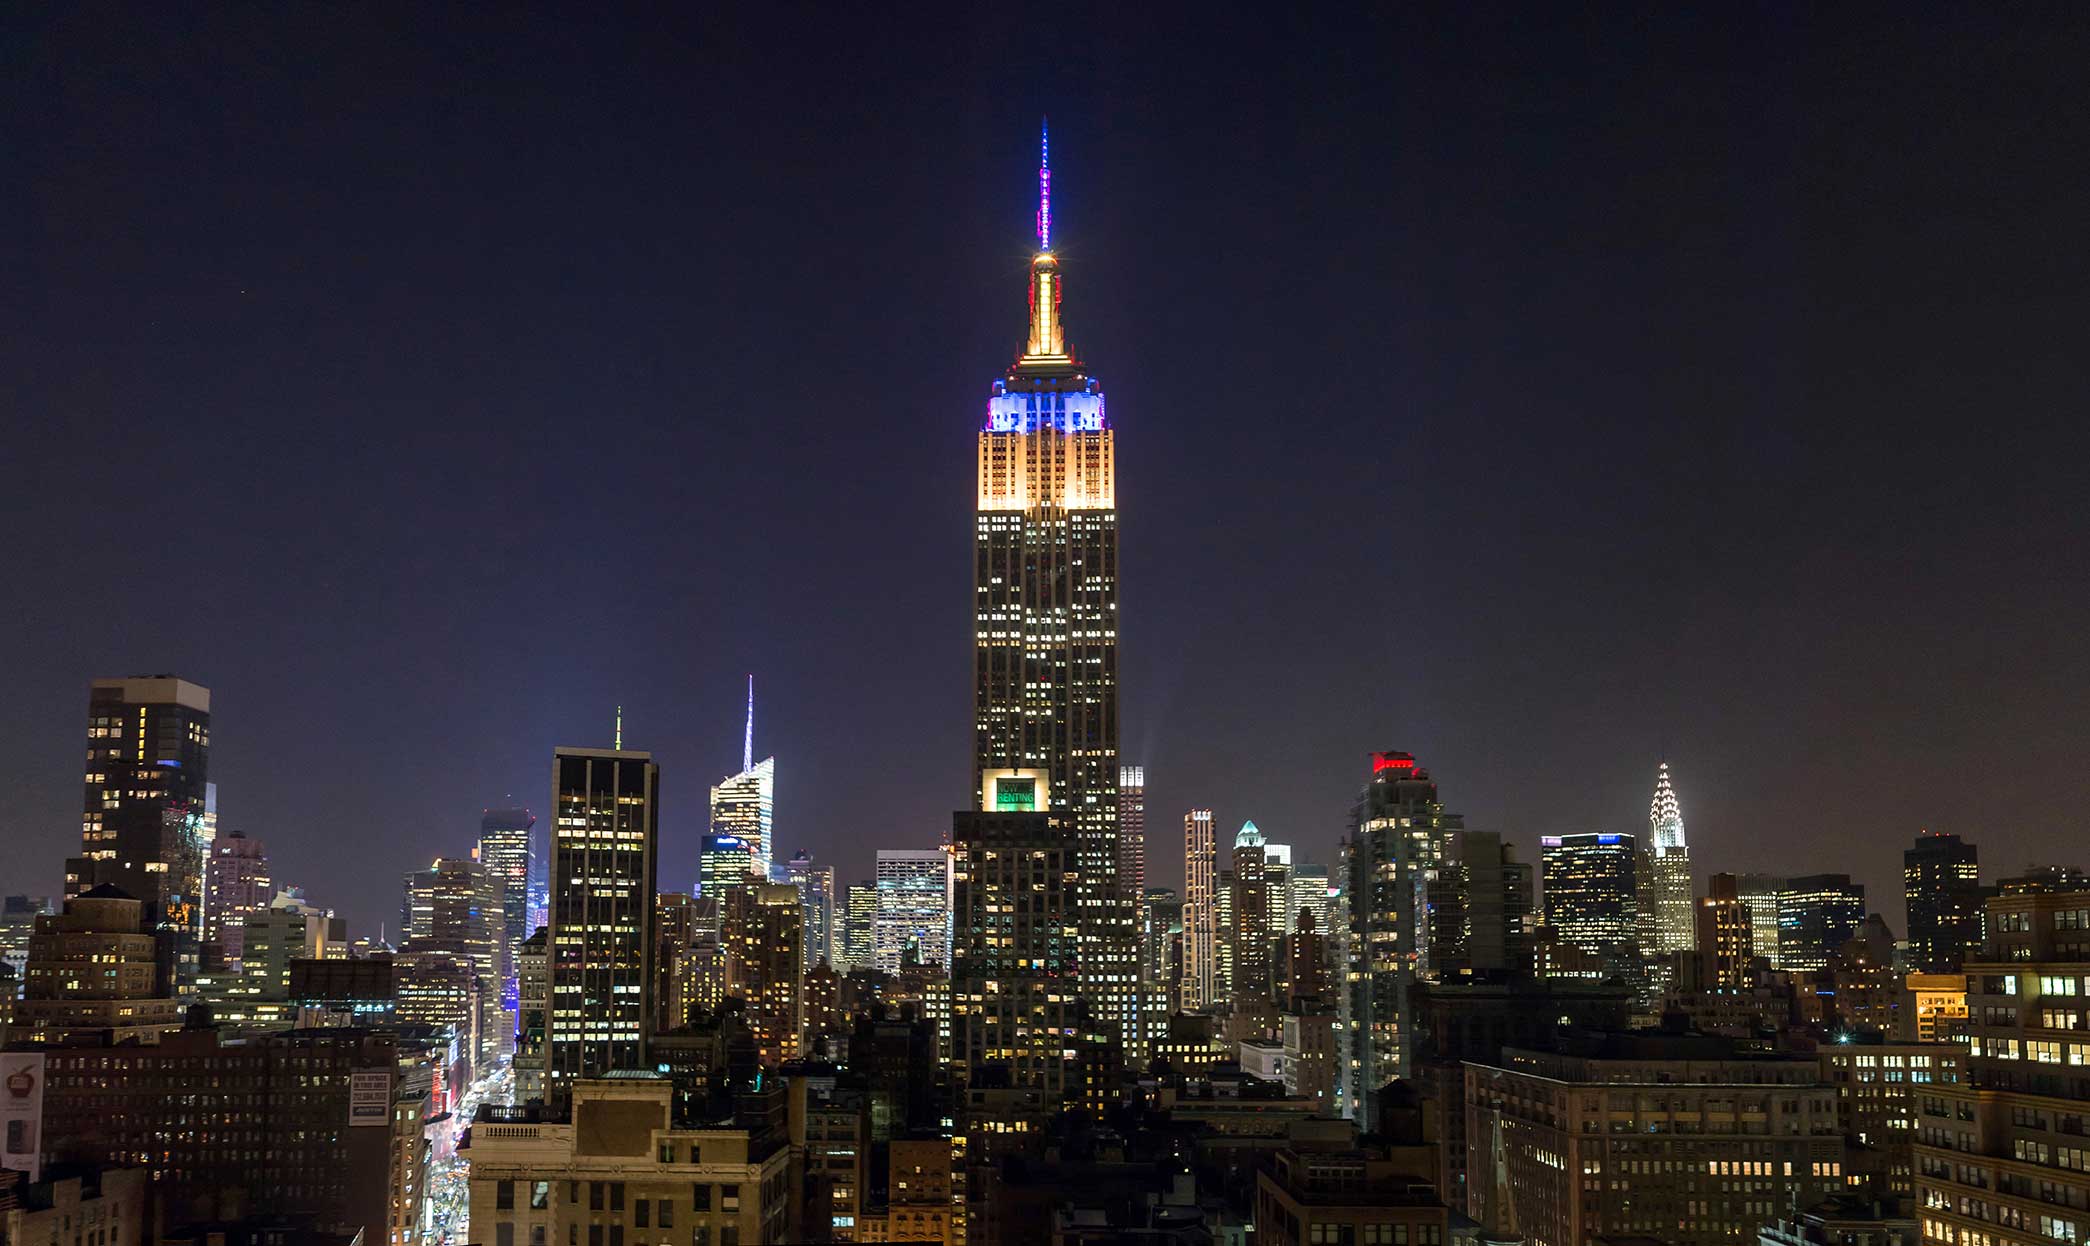 Dec. 27, 2013; The Empire State Building in New York City is lit with blue and gold lighting to mark the 2013 Pinstripe Bowl game between Notre Dame and Rutgers. Photo by Matt Cashore 